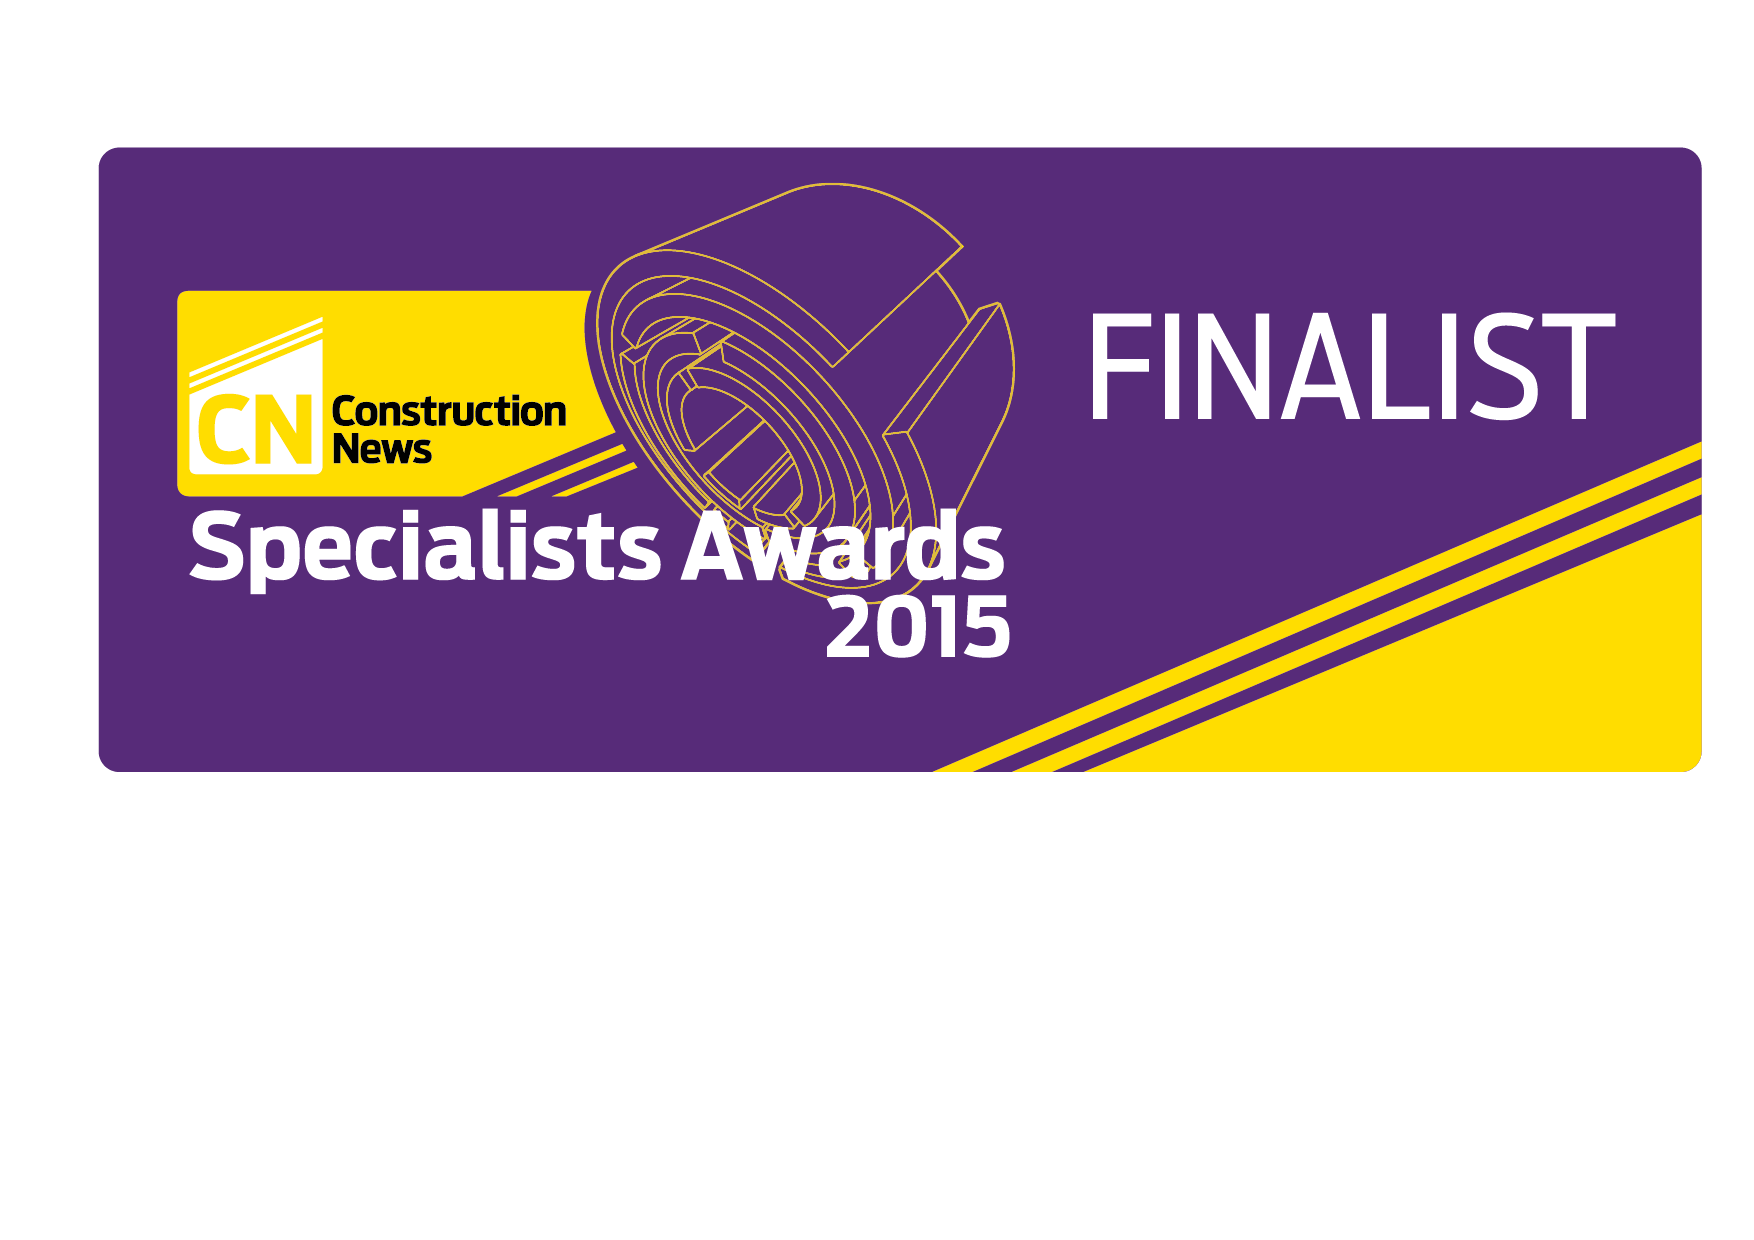 CSIC CSattAR and UtterBerry technologies shortlisted for Construction News Specialist Awards 2015